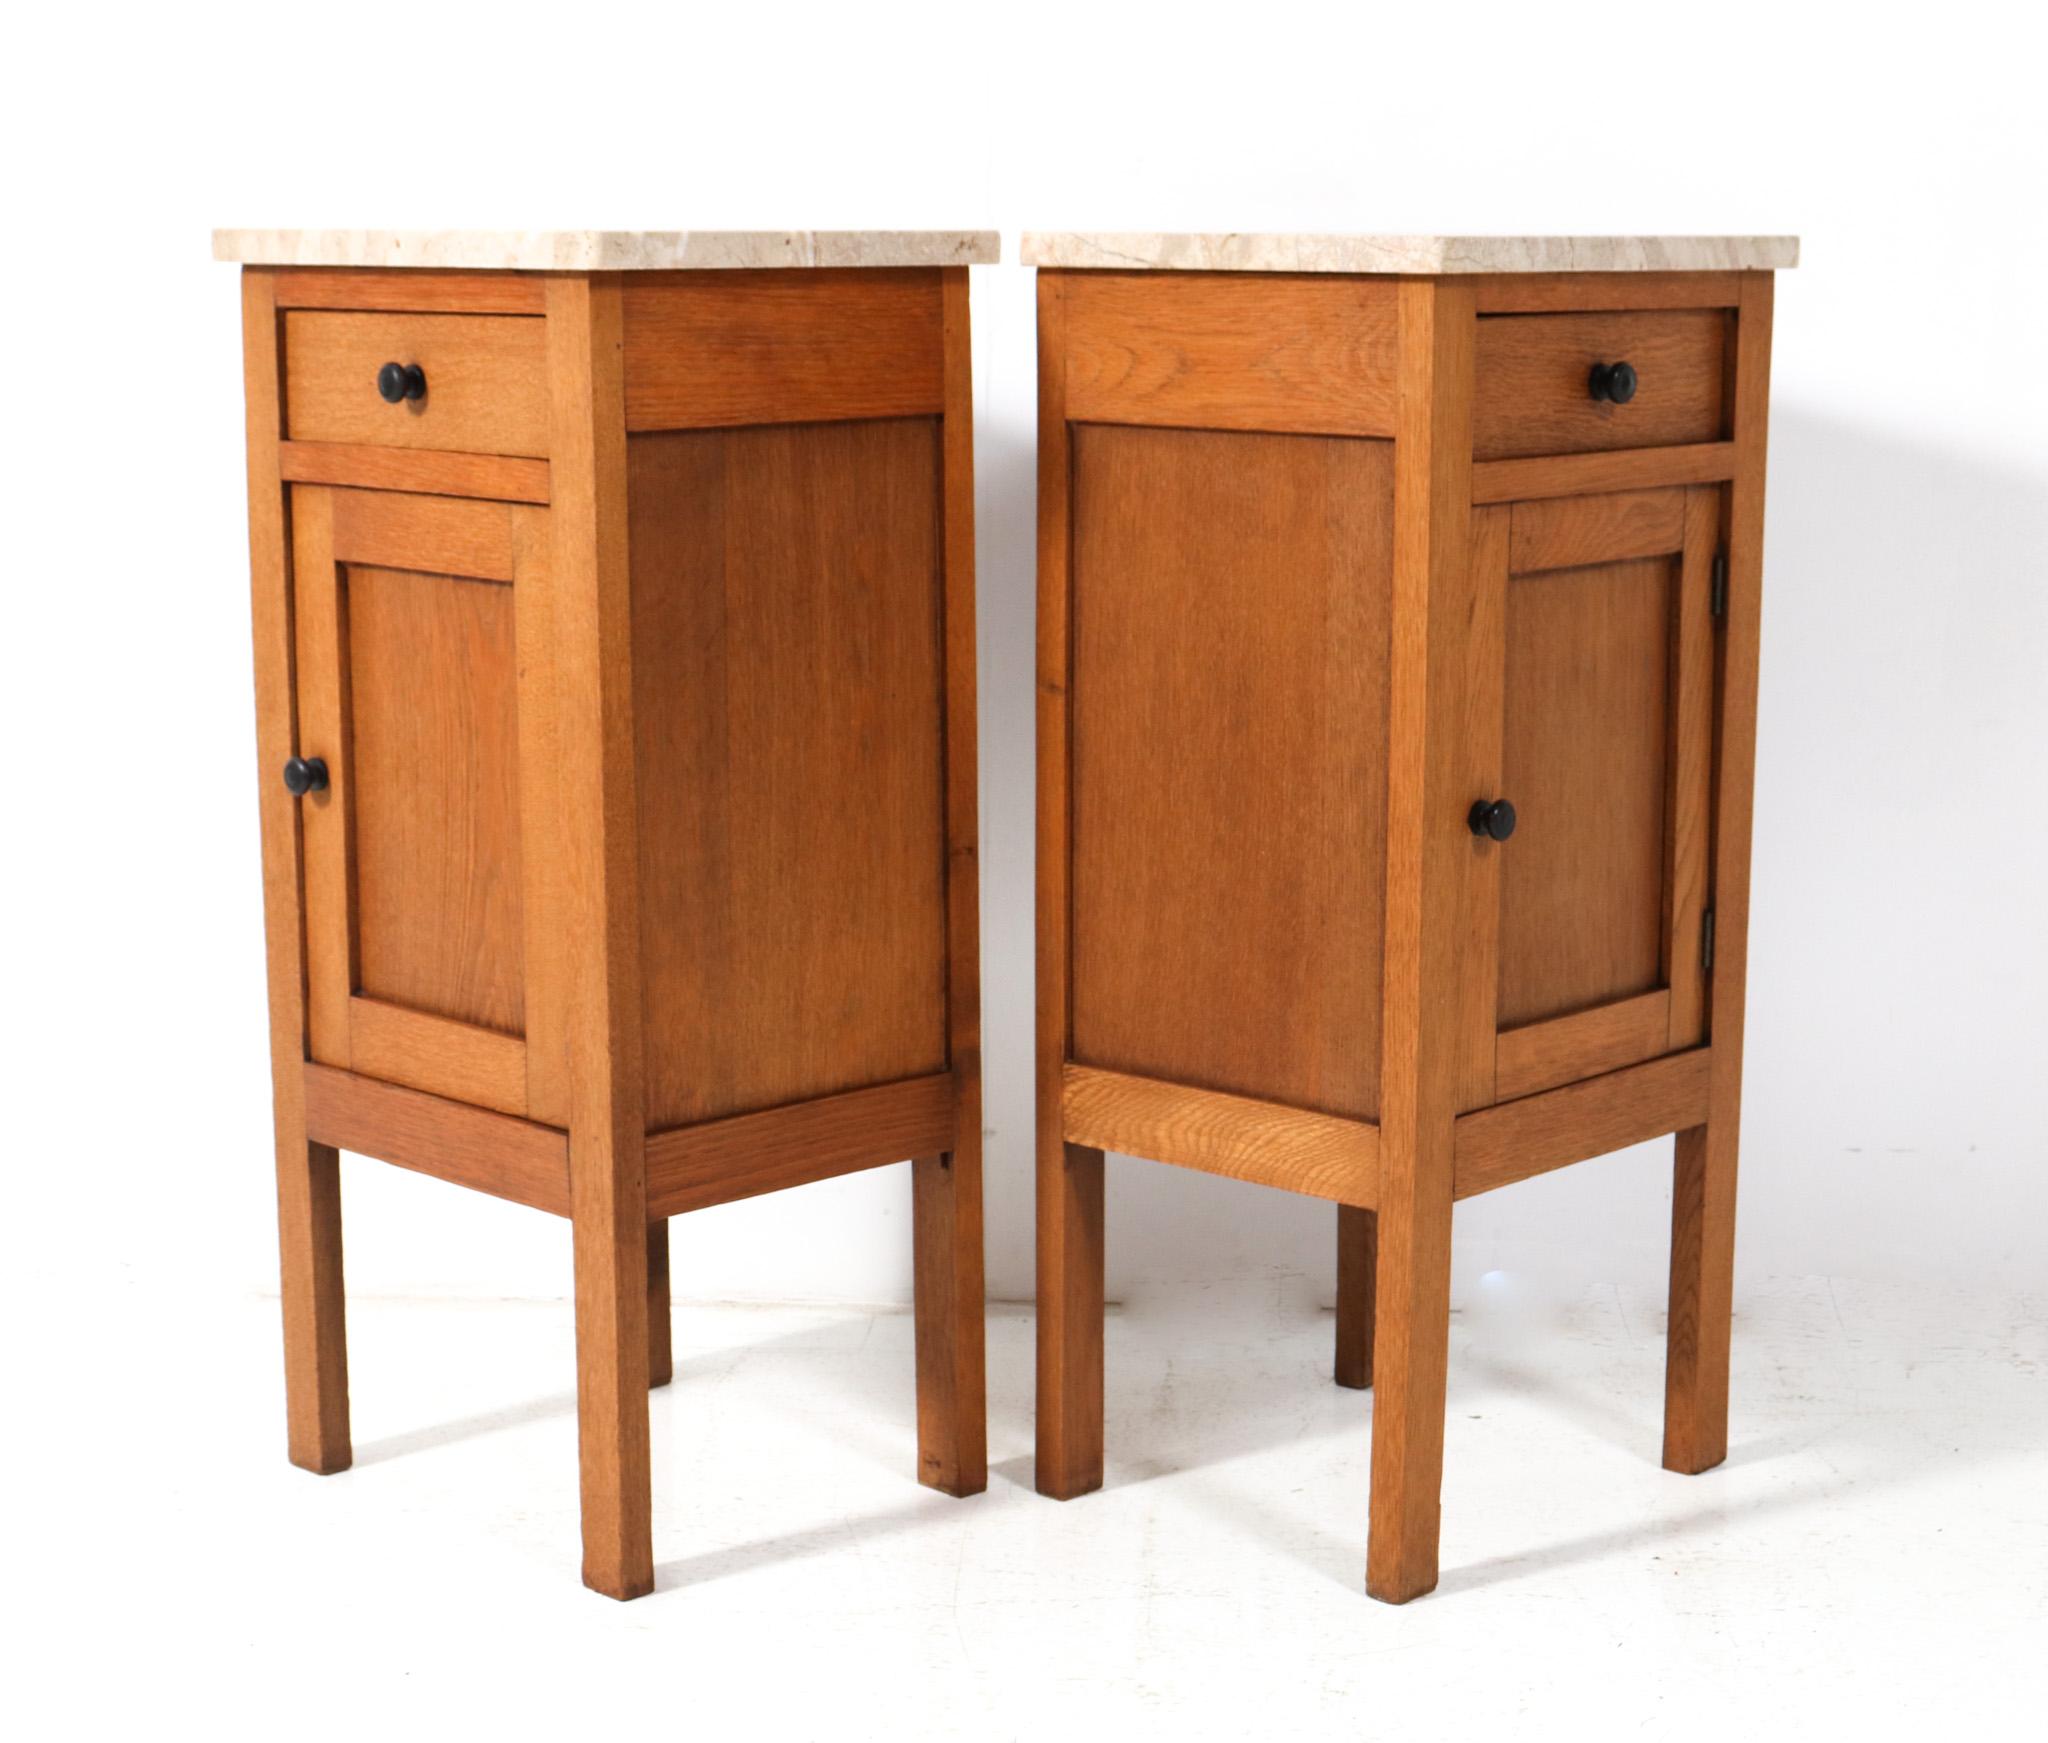 Two Arts & Crafts Art Nouveau Oak Nightstands or Bedside Tables, 1900s For Sale 1